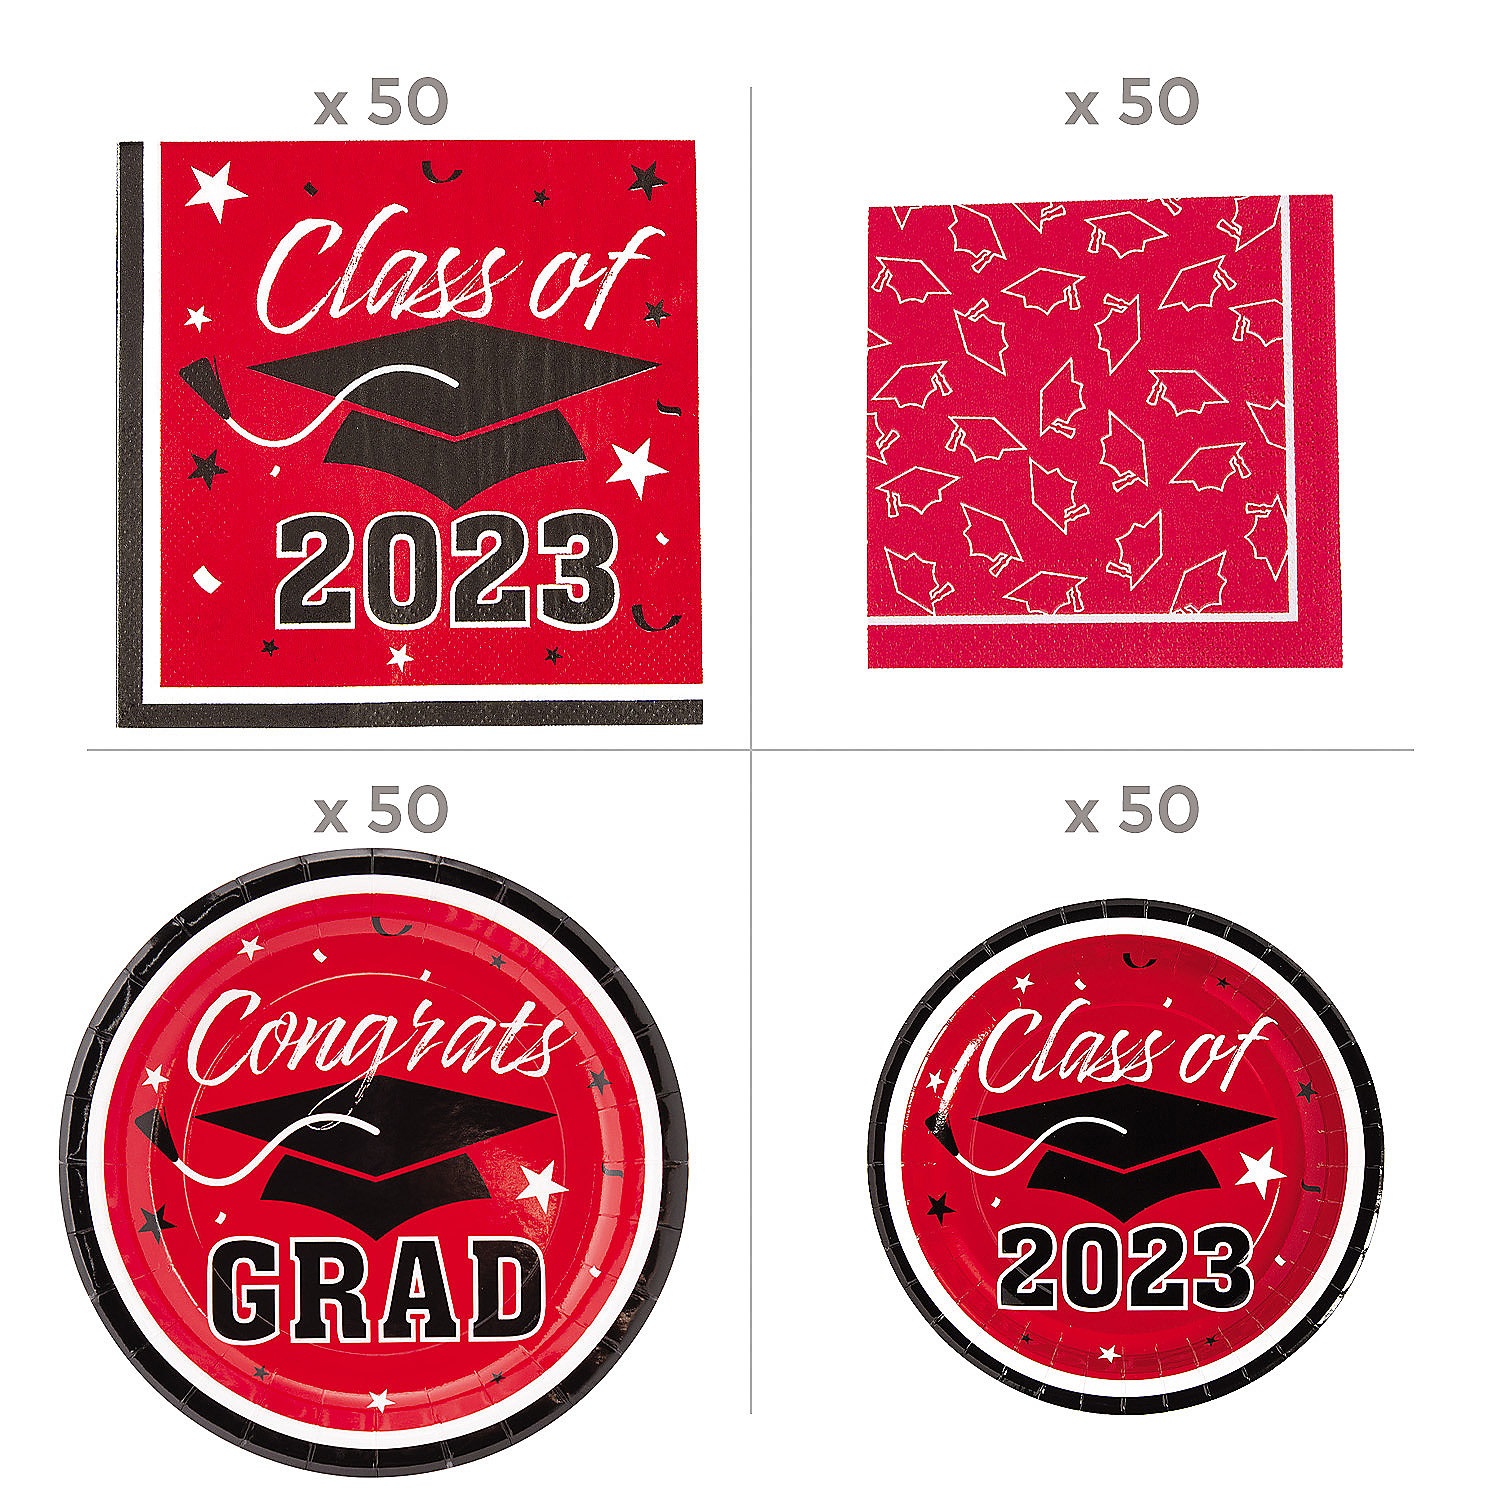 red-2023-congrats-grad-party-tableware-kit-for-50-guests_14208479-a01